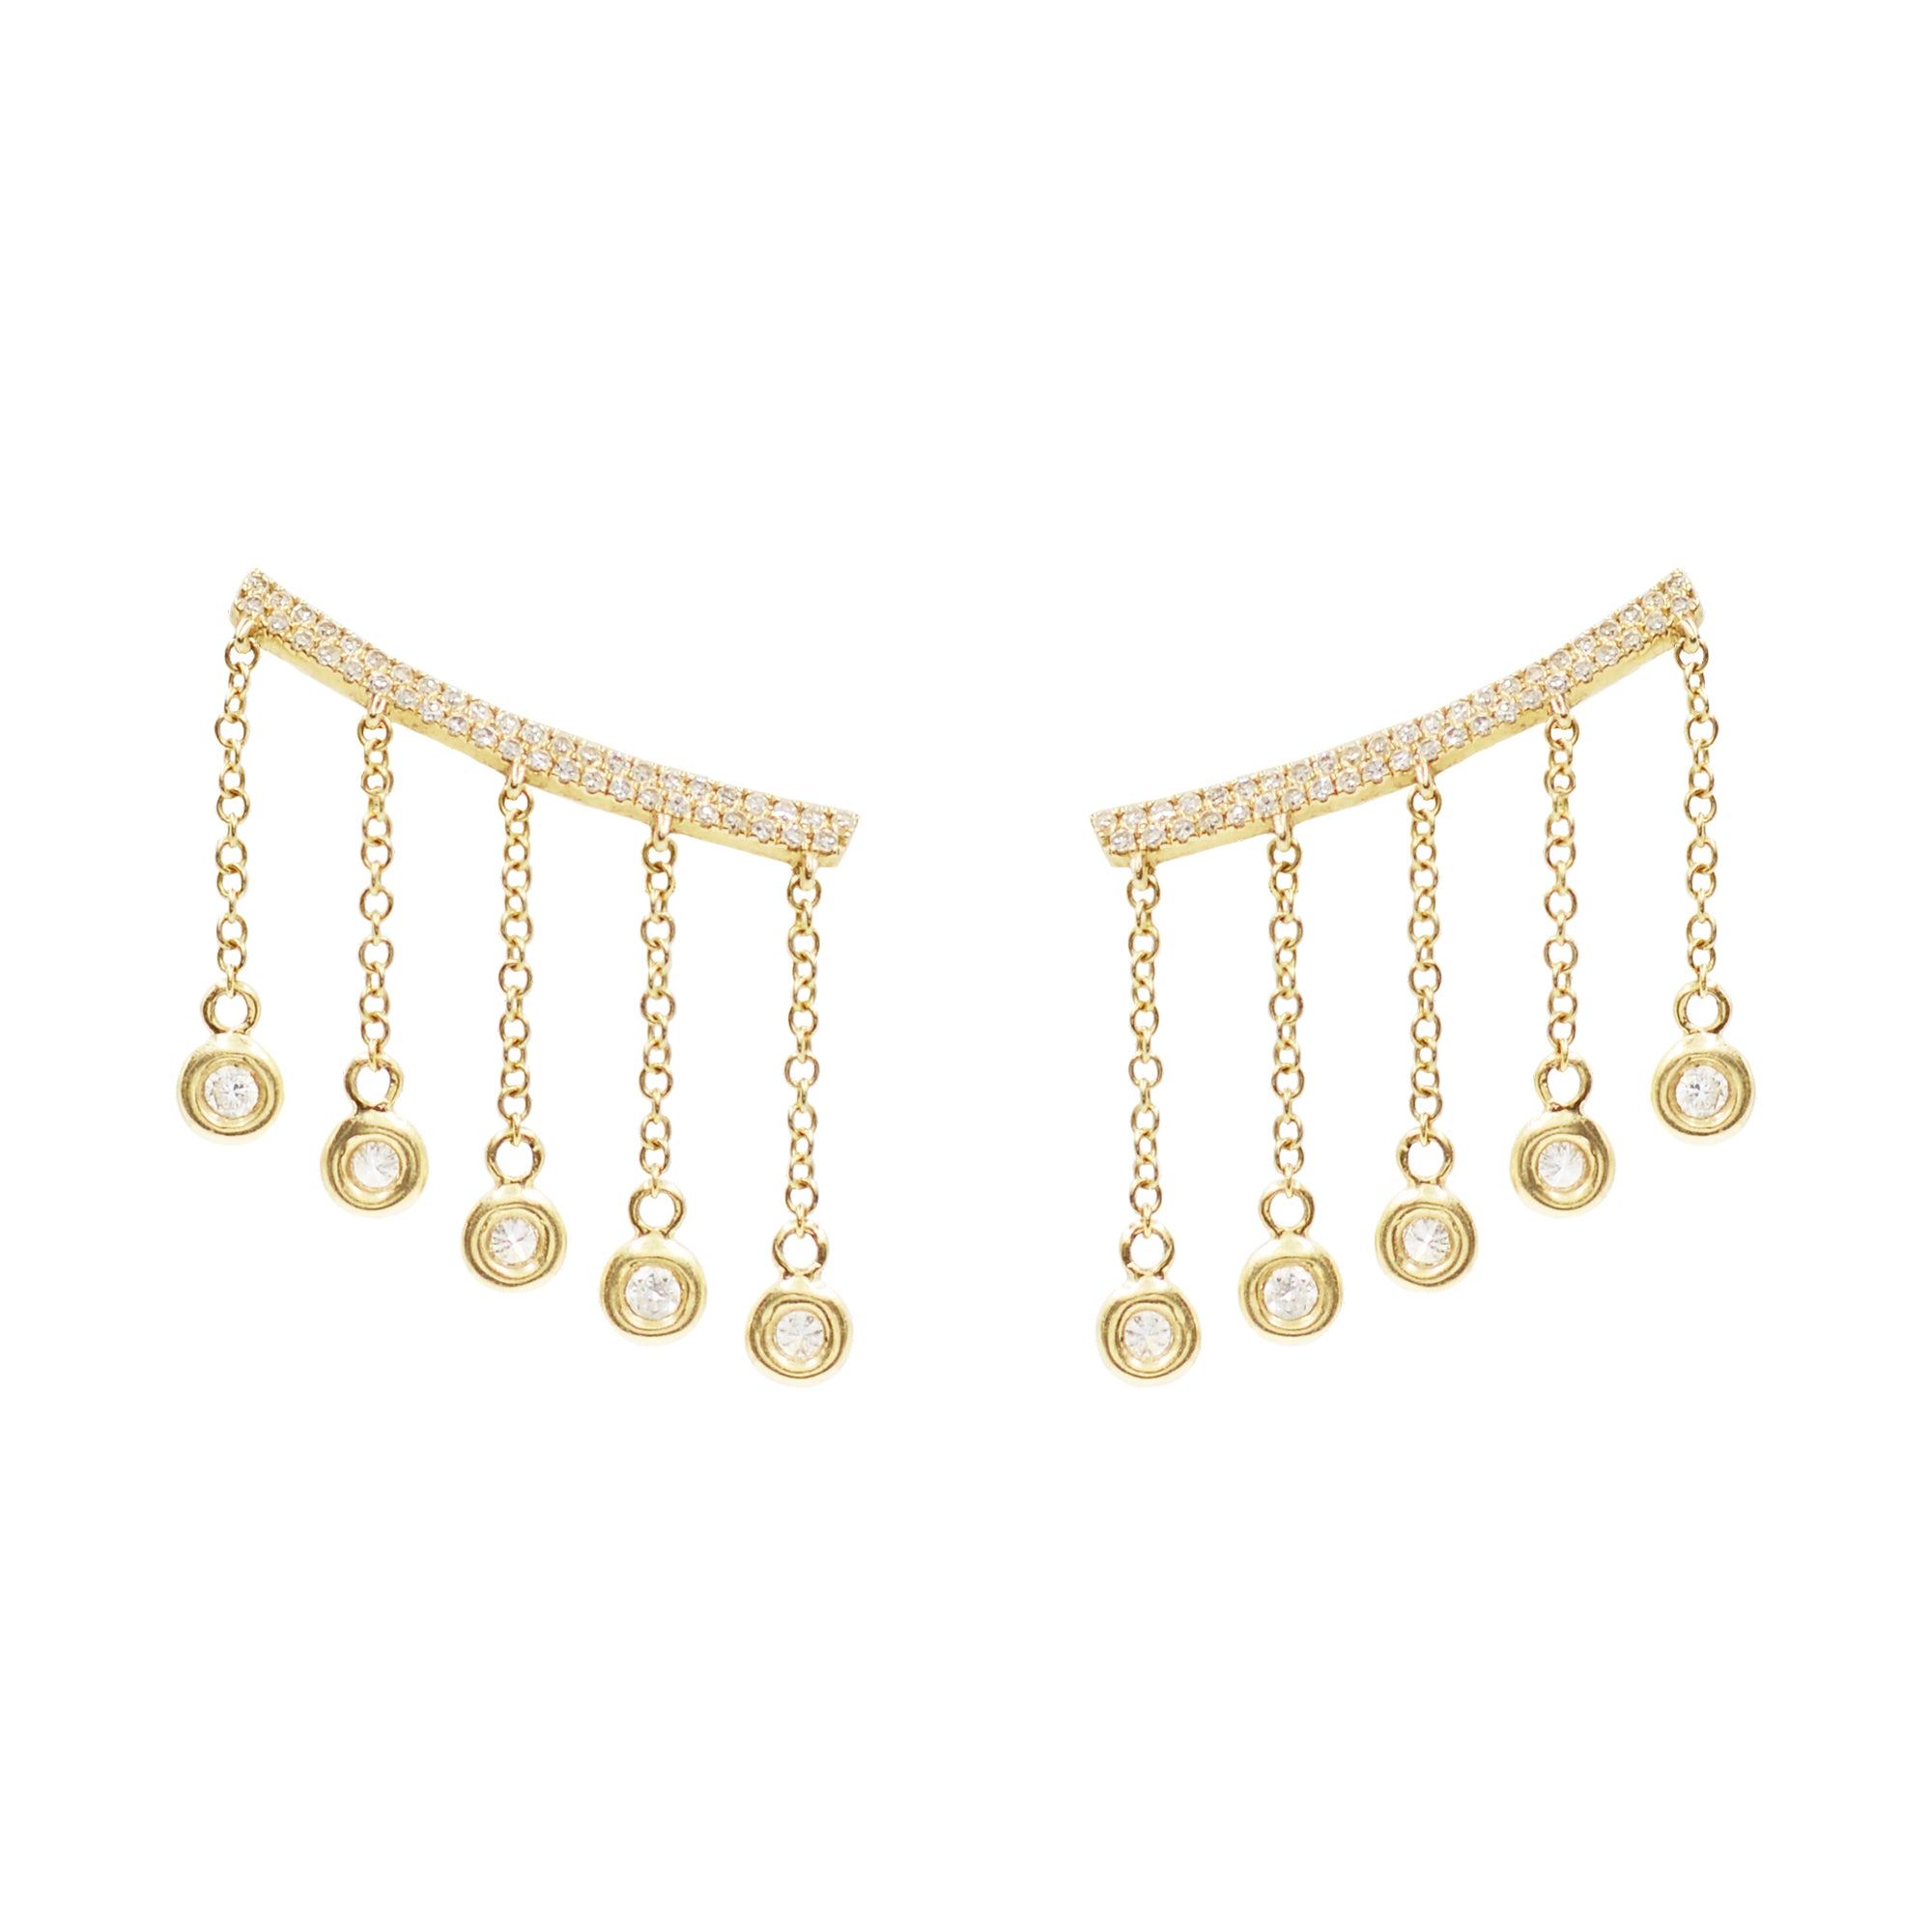 Cleo Ear Crawler Earrings With Crystal Drops in Gold